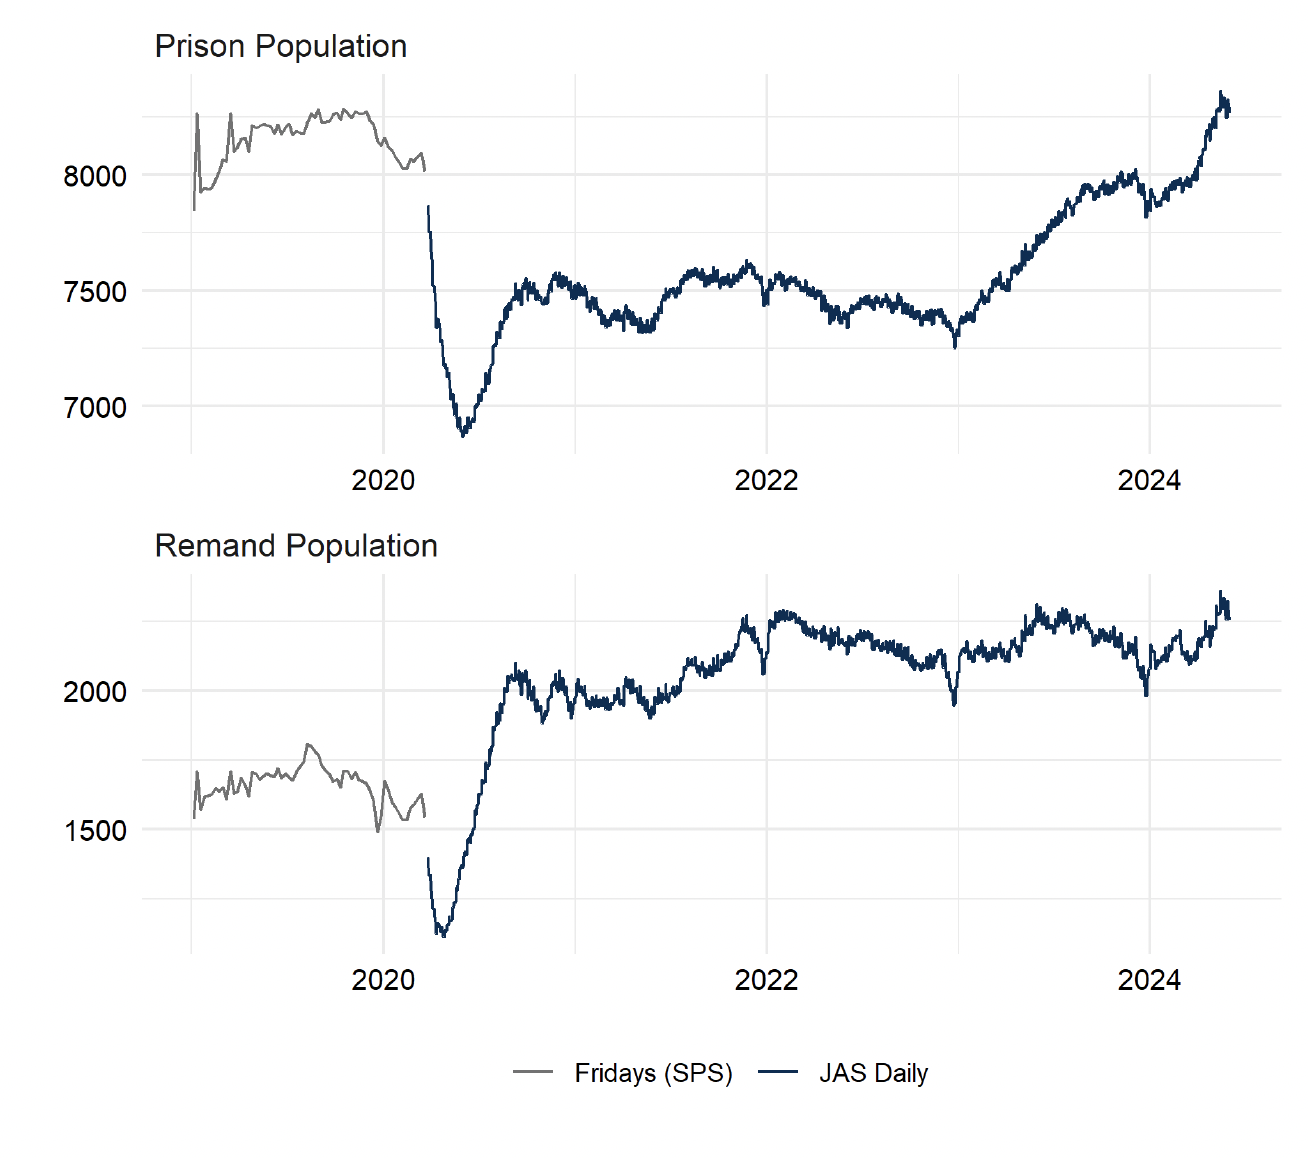 The Friday prison population overall and the remand population up to March 2020. Thereafter, daily population figures are provided. The trends are described in the body text. Last updated June 2024. Next update due July 2024.